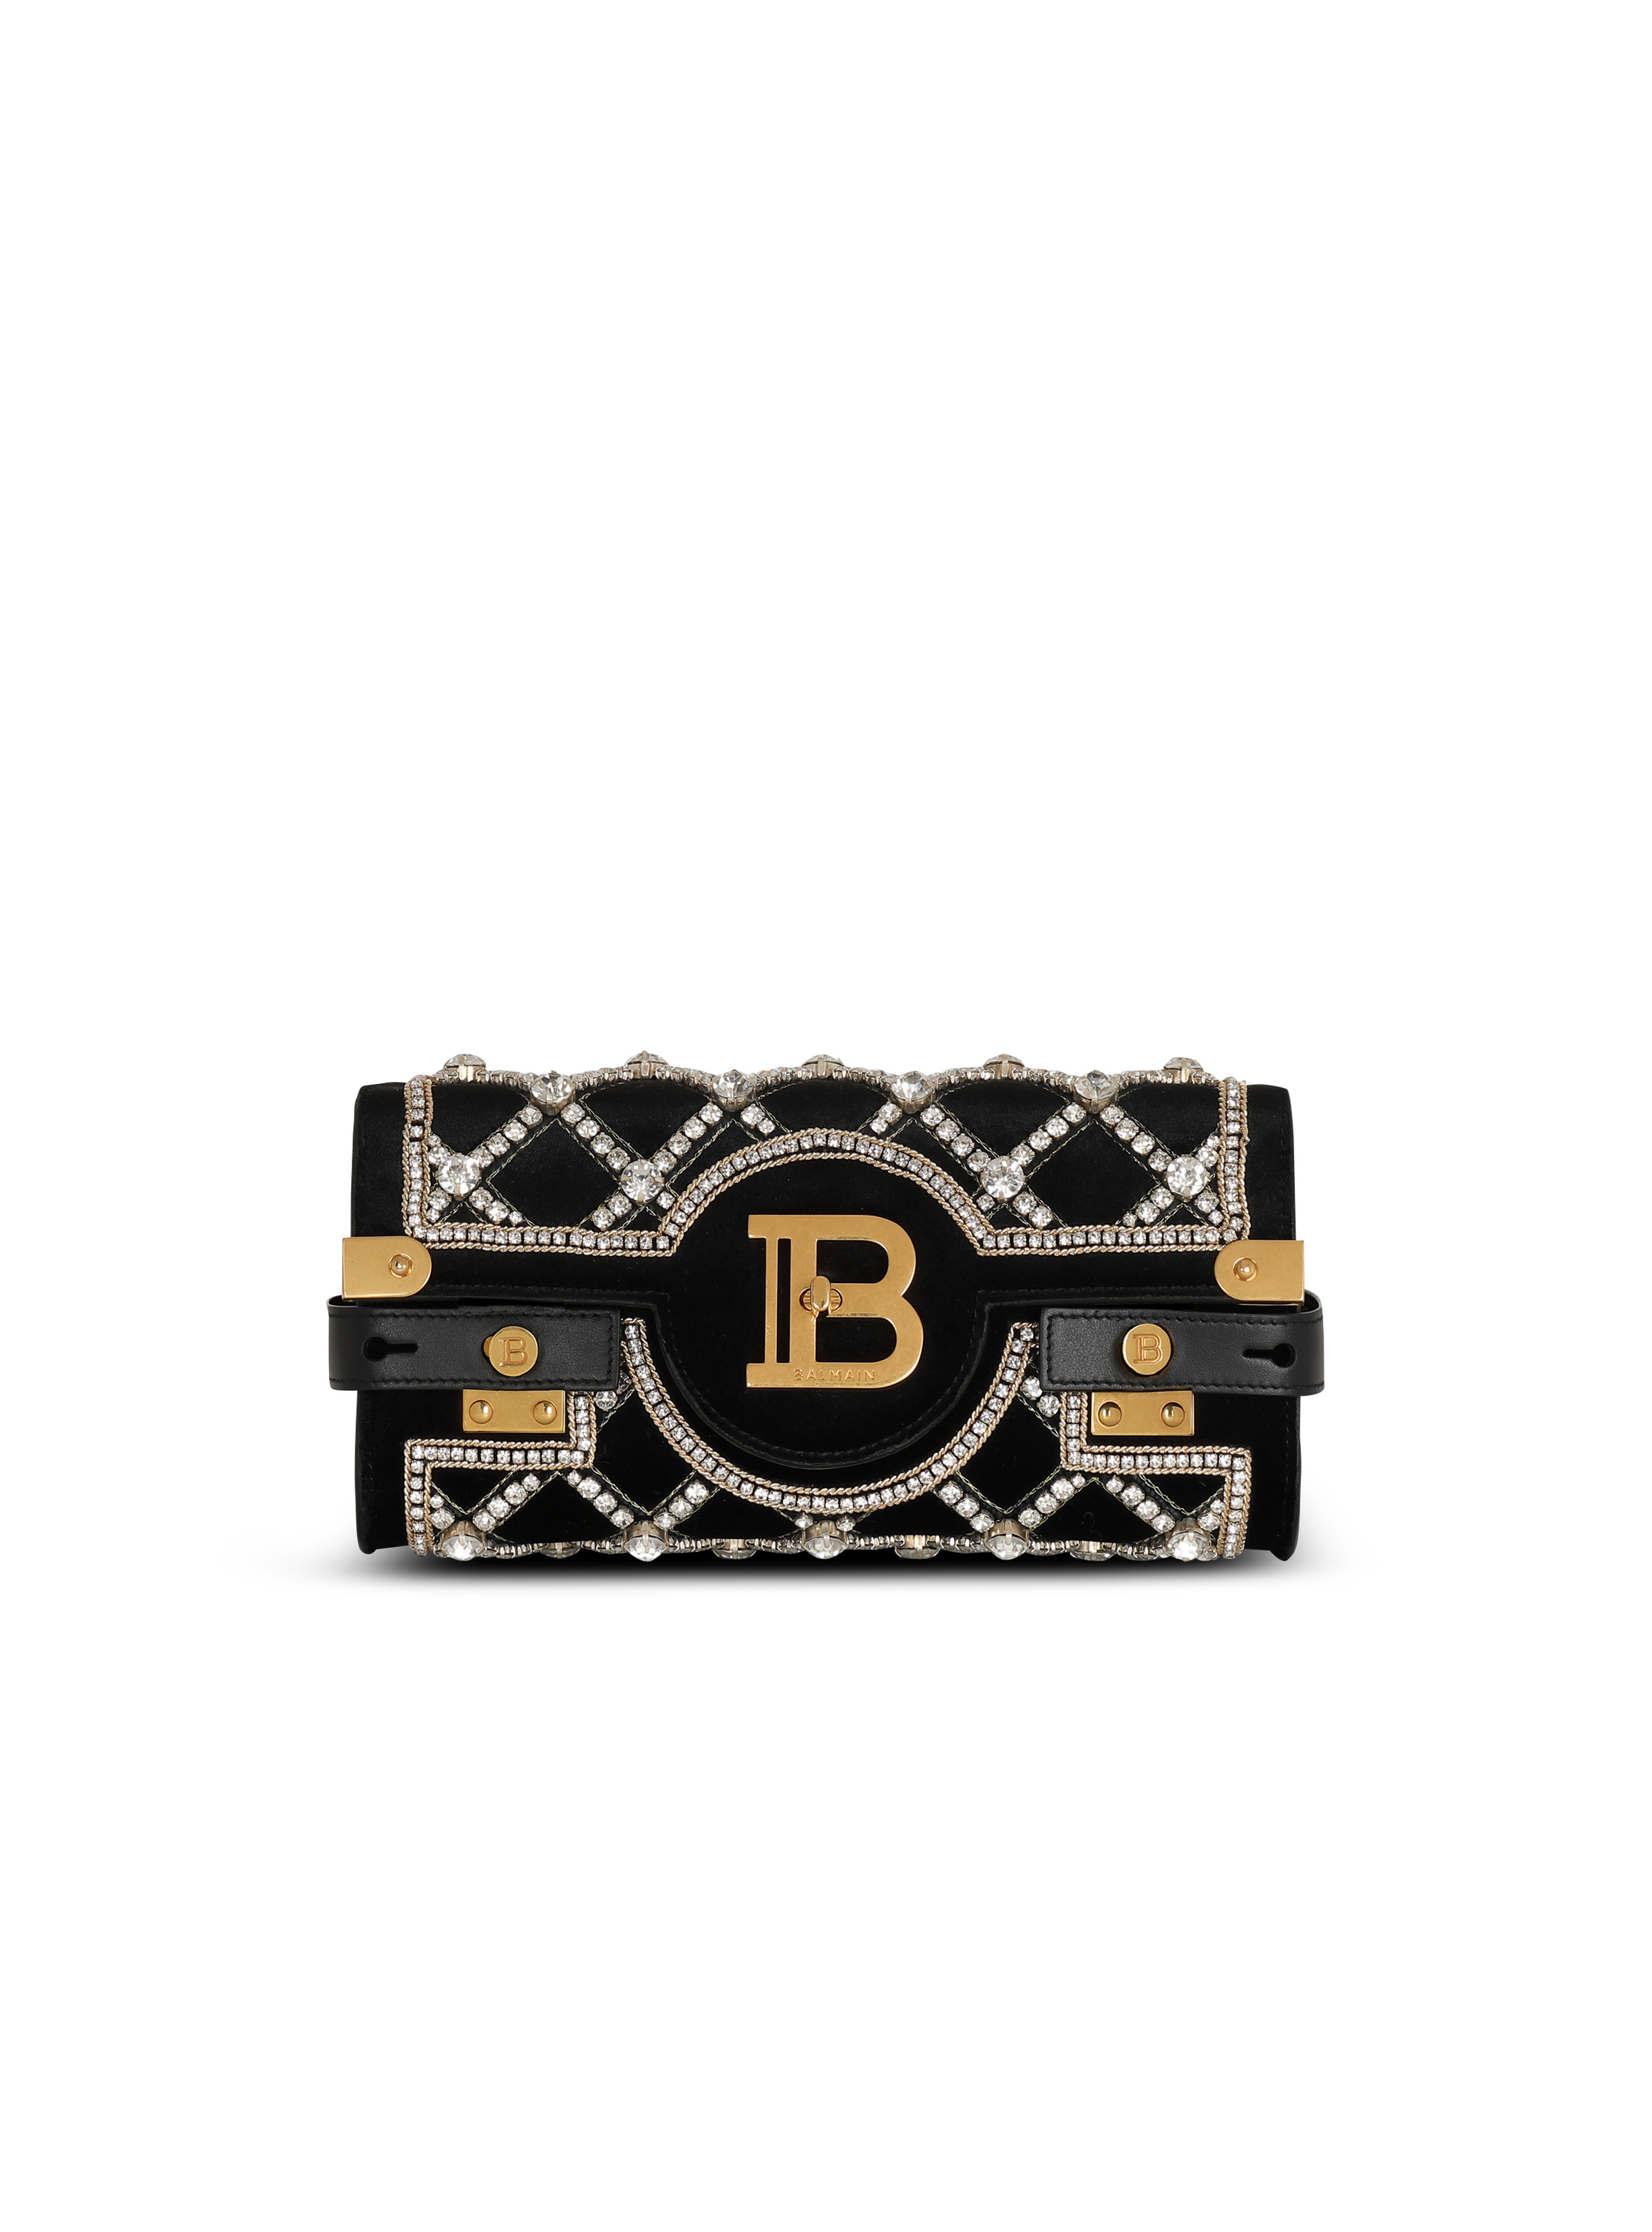 B-Buzz 23 velvet and pearl clutch - 1